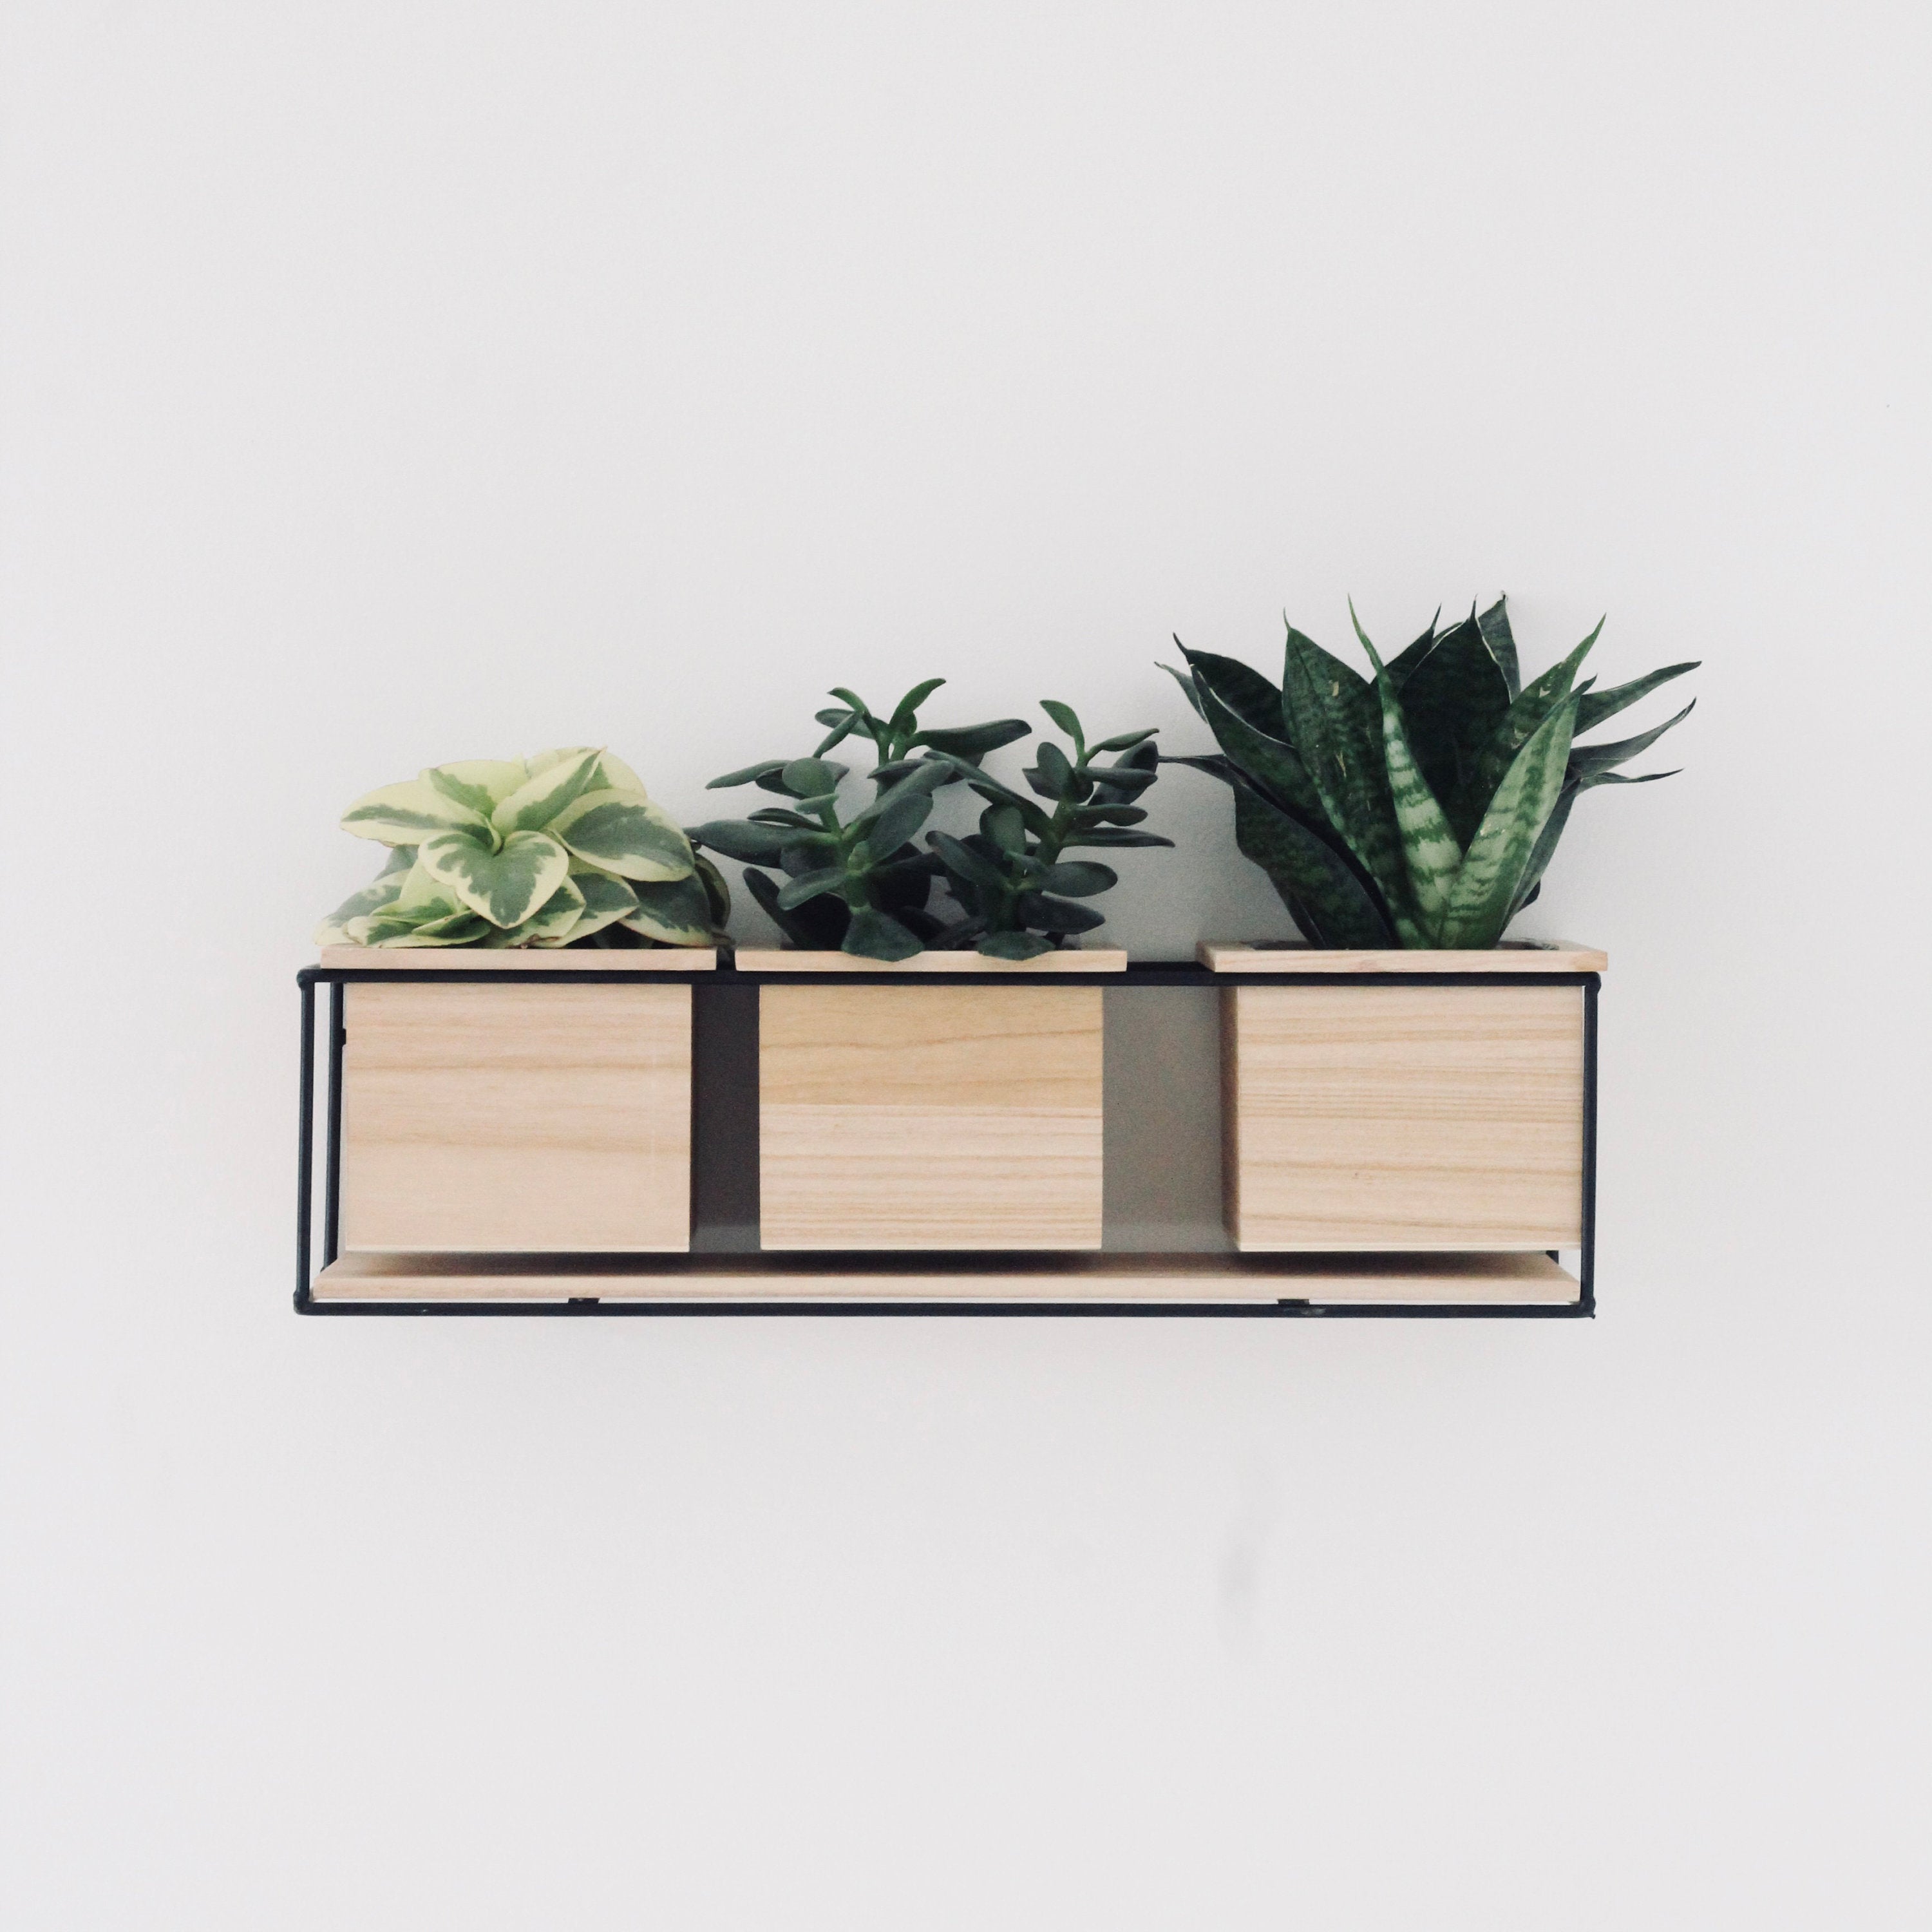 Wall Shelf and Planter, Office and Kitchen Organization